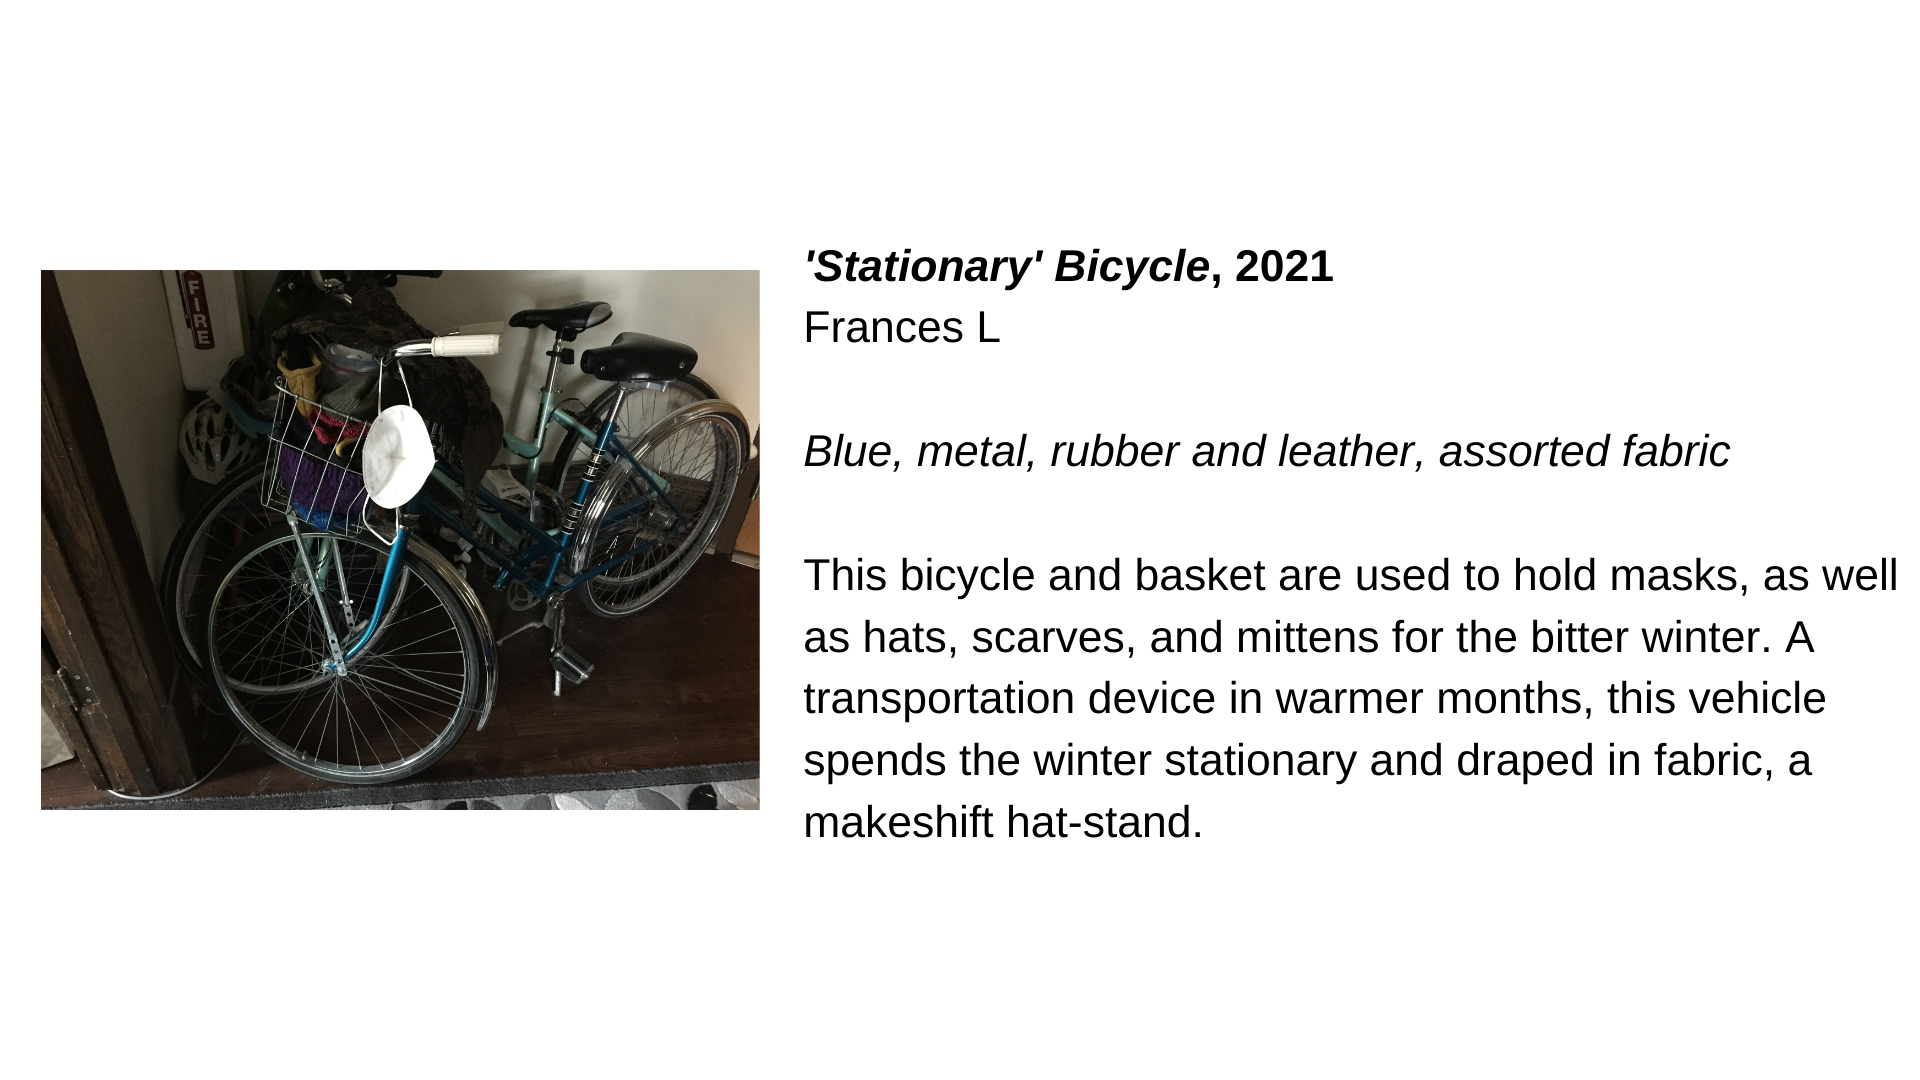  A photograph of a bicycle next to the text, “'Stationary' Bicycle, 2021 - Frances L. Blue, metal, rubber and leather, assorted fabric. This bicycle and basket are used to hold masks, as well as hats, scarves, and mittens for the bitter winter. A tra